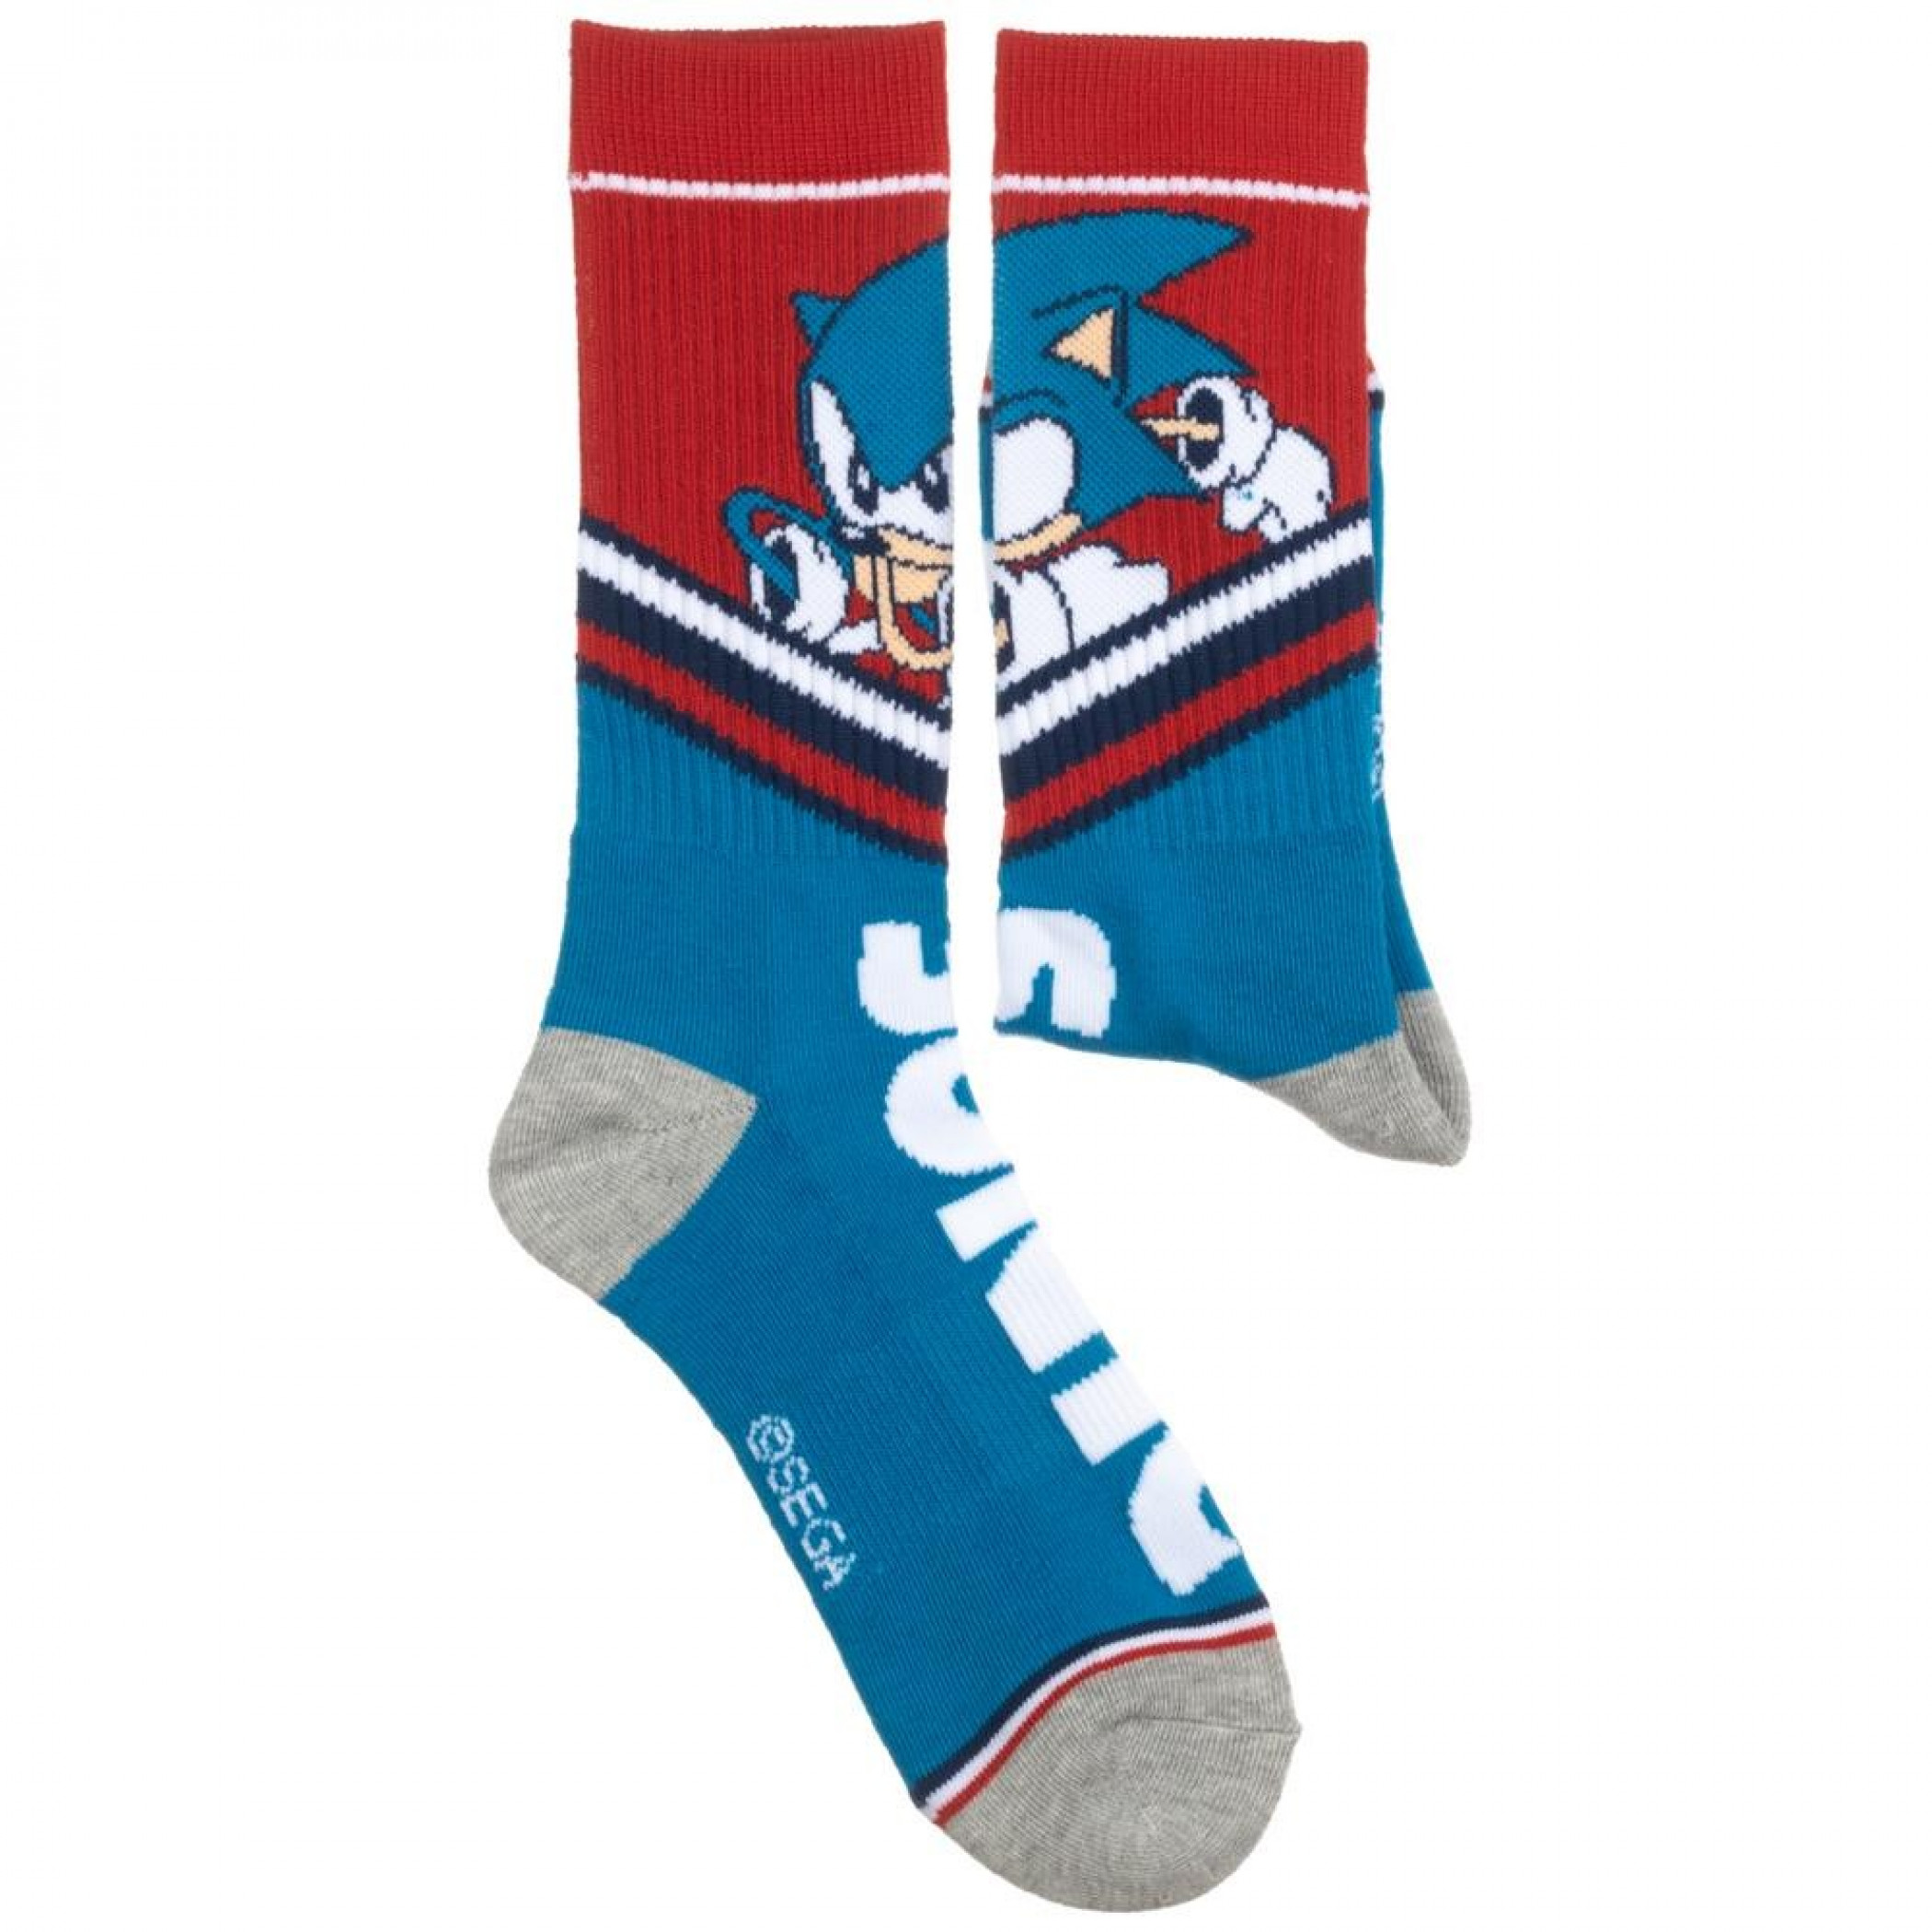 Sonic Blue and Red Athletic Crew Socks